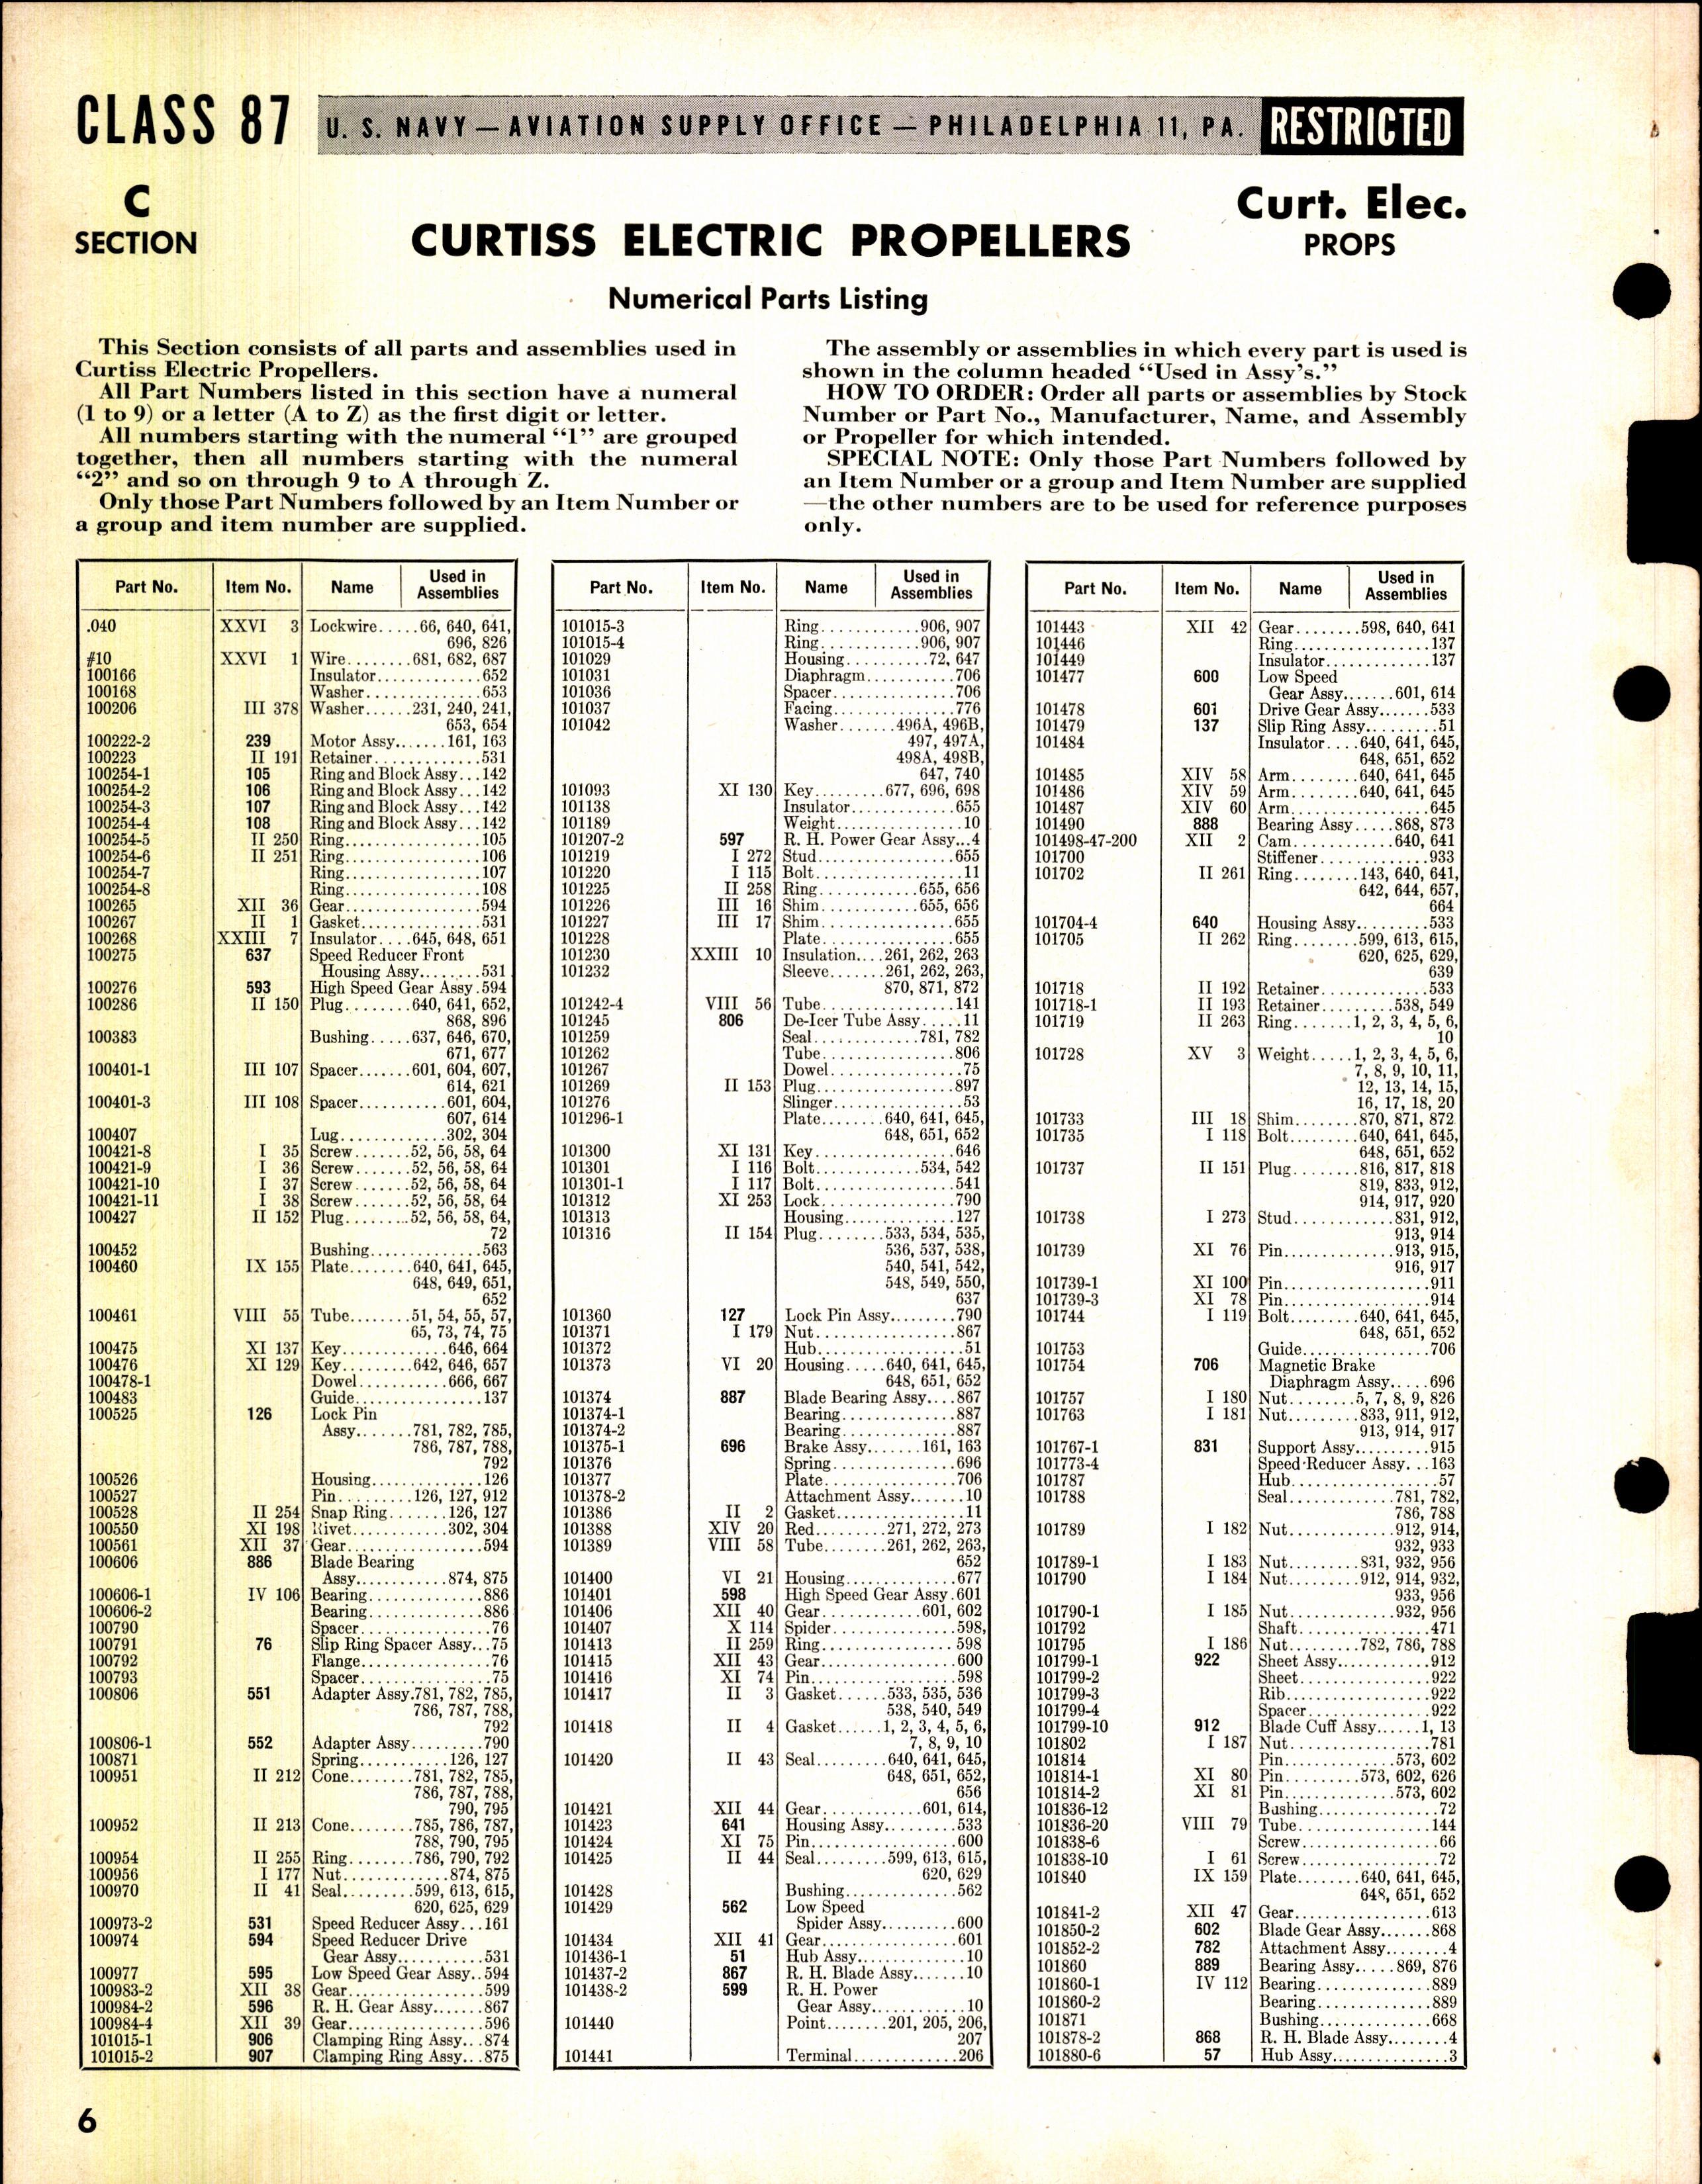 Sample page 6 from AirCorps Library document: Numerical Listing